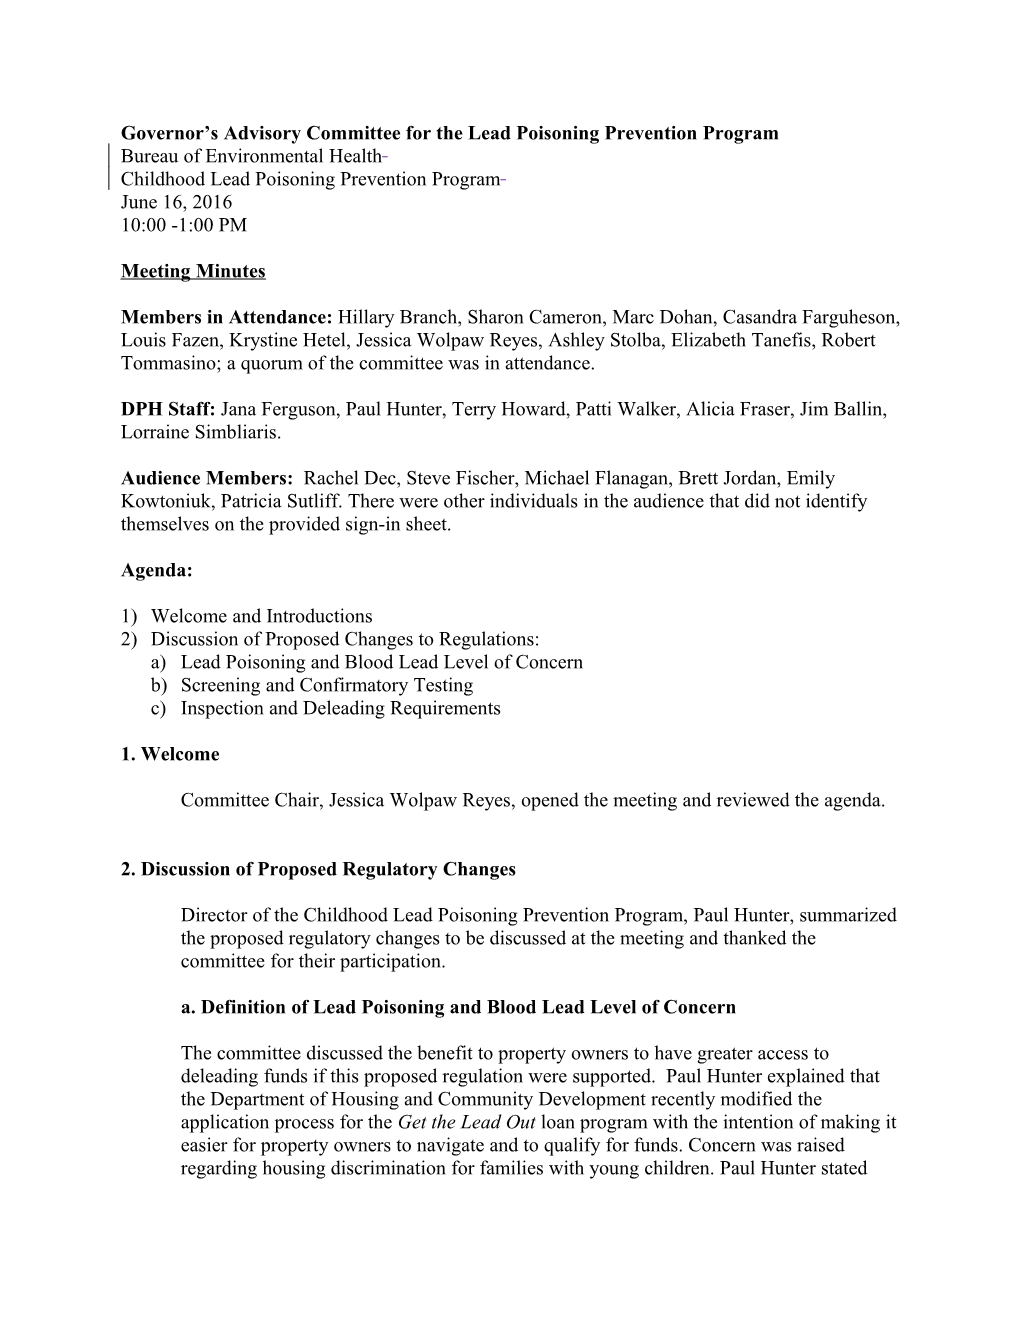 Governor S Advisory Committee for the Lead Poisoning Prevention Program Meeting Minutes